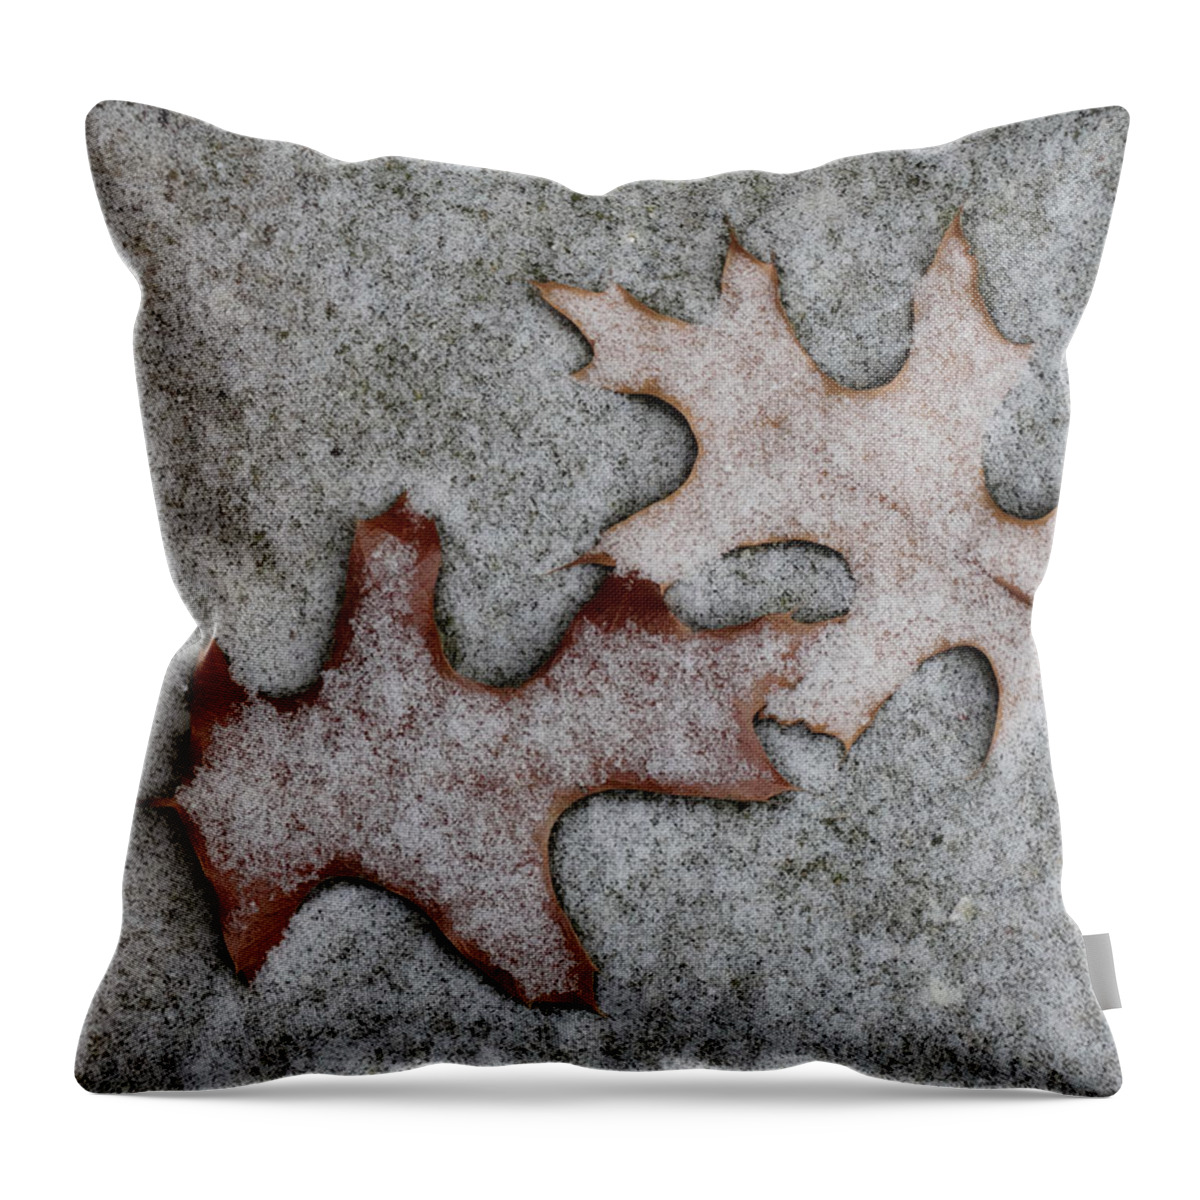 Two Throw Pillow featuring the photograph Snow Dusted Oak Leaves by David T Wilkinson